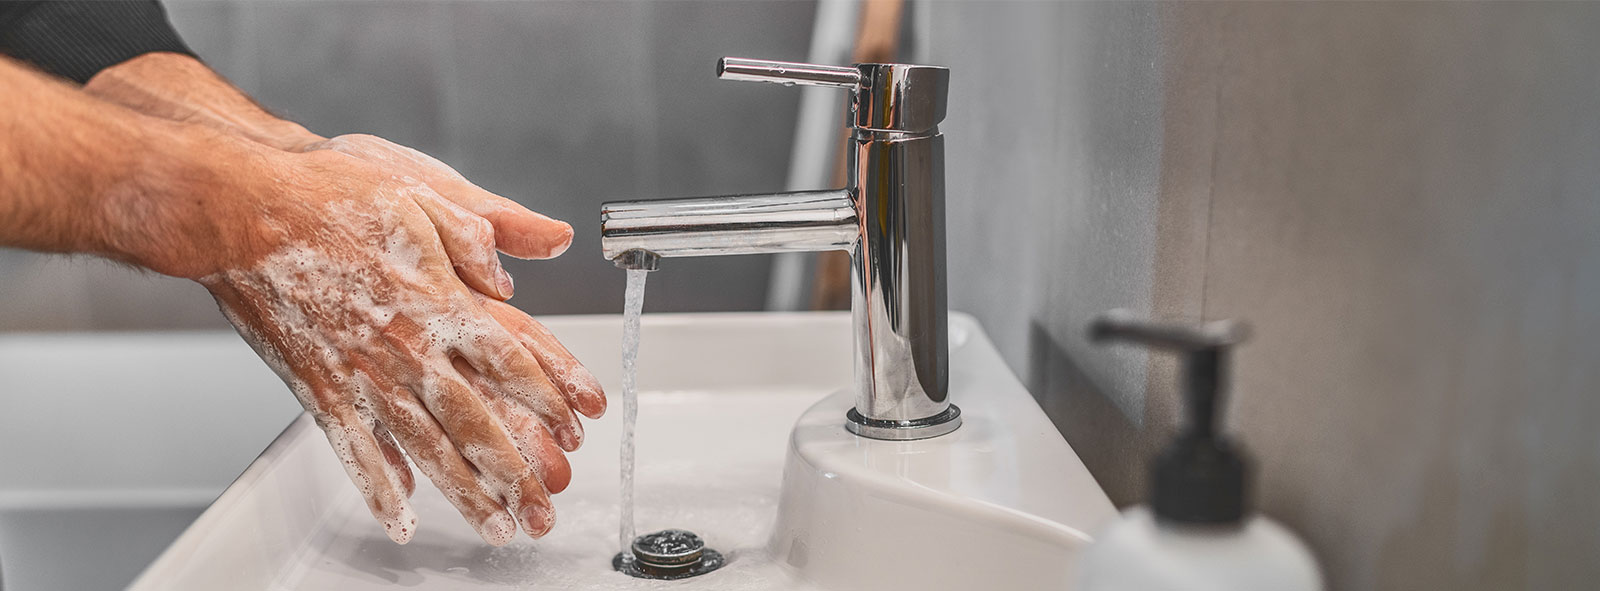 Corona virus travel prevention wash hands with soap and hot water.